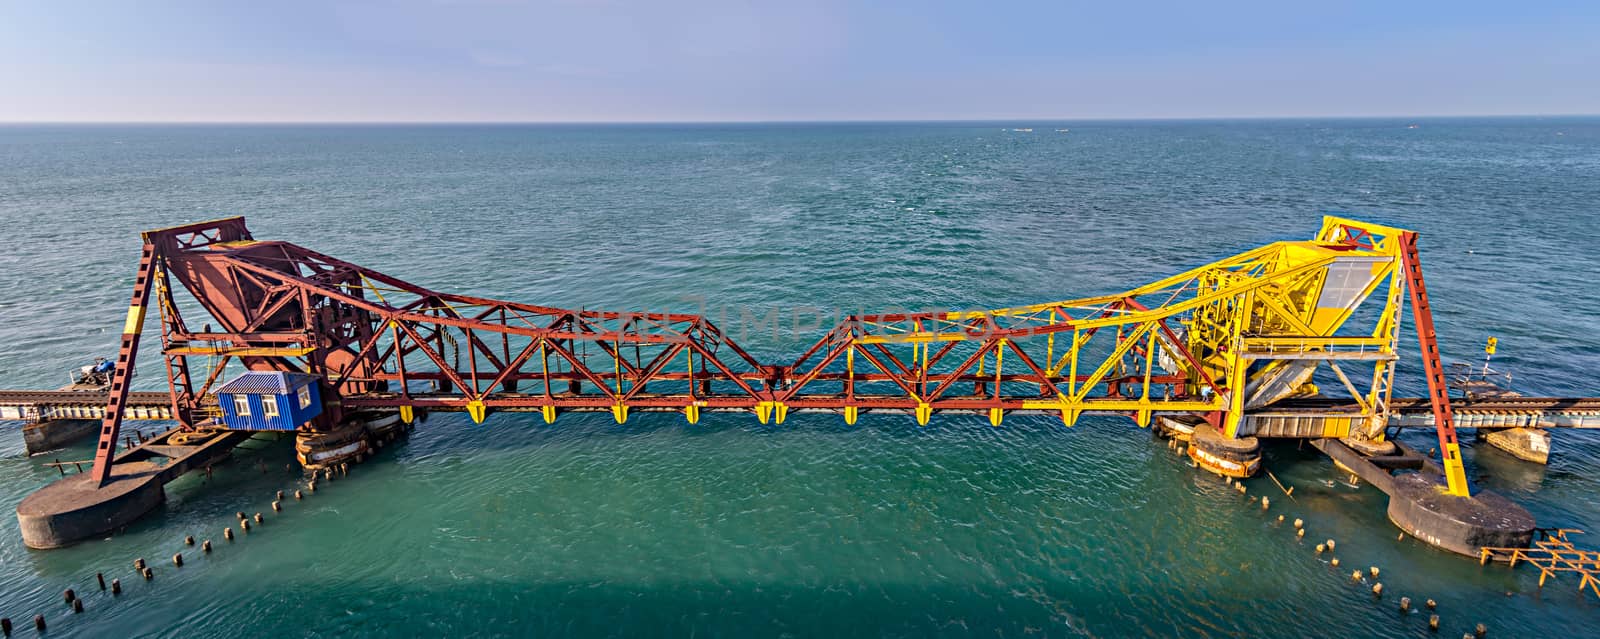 Pamban Bridge is a railway bridge which connects the town of Mandapam in mainland India with Pamban Island, and Rameswaram. by lalam